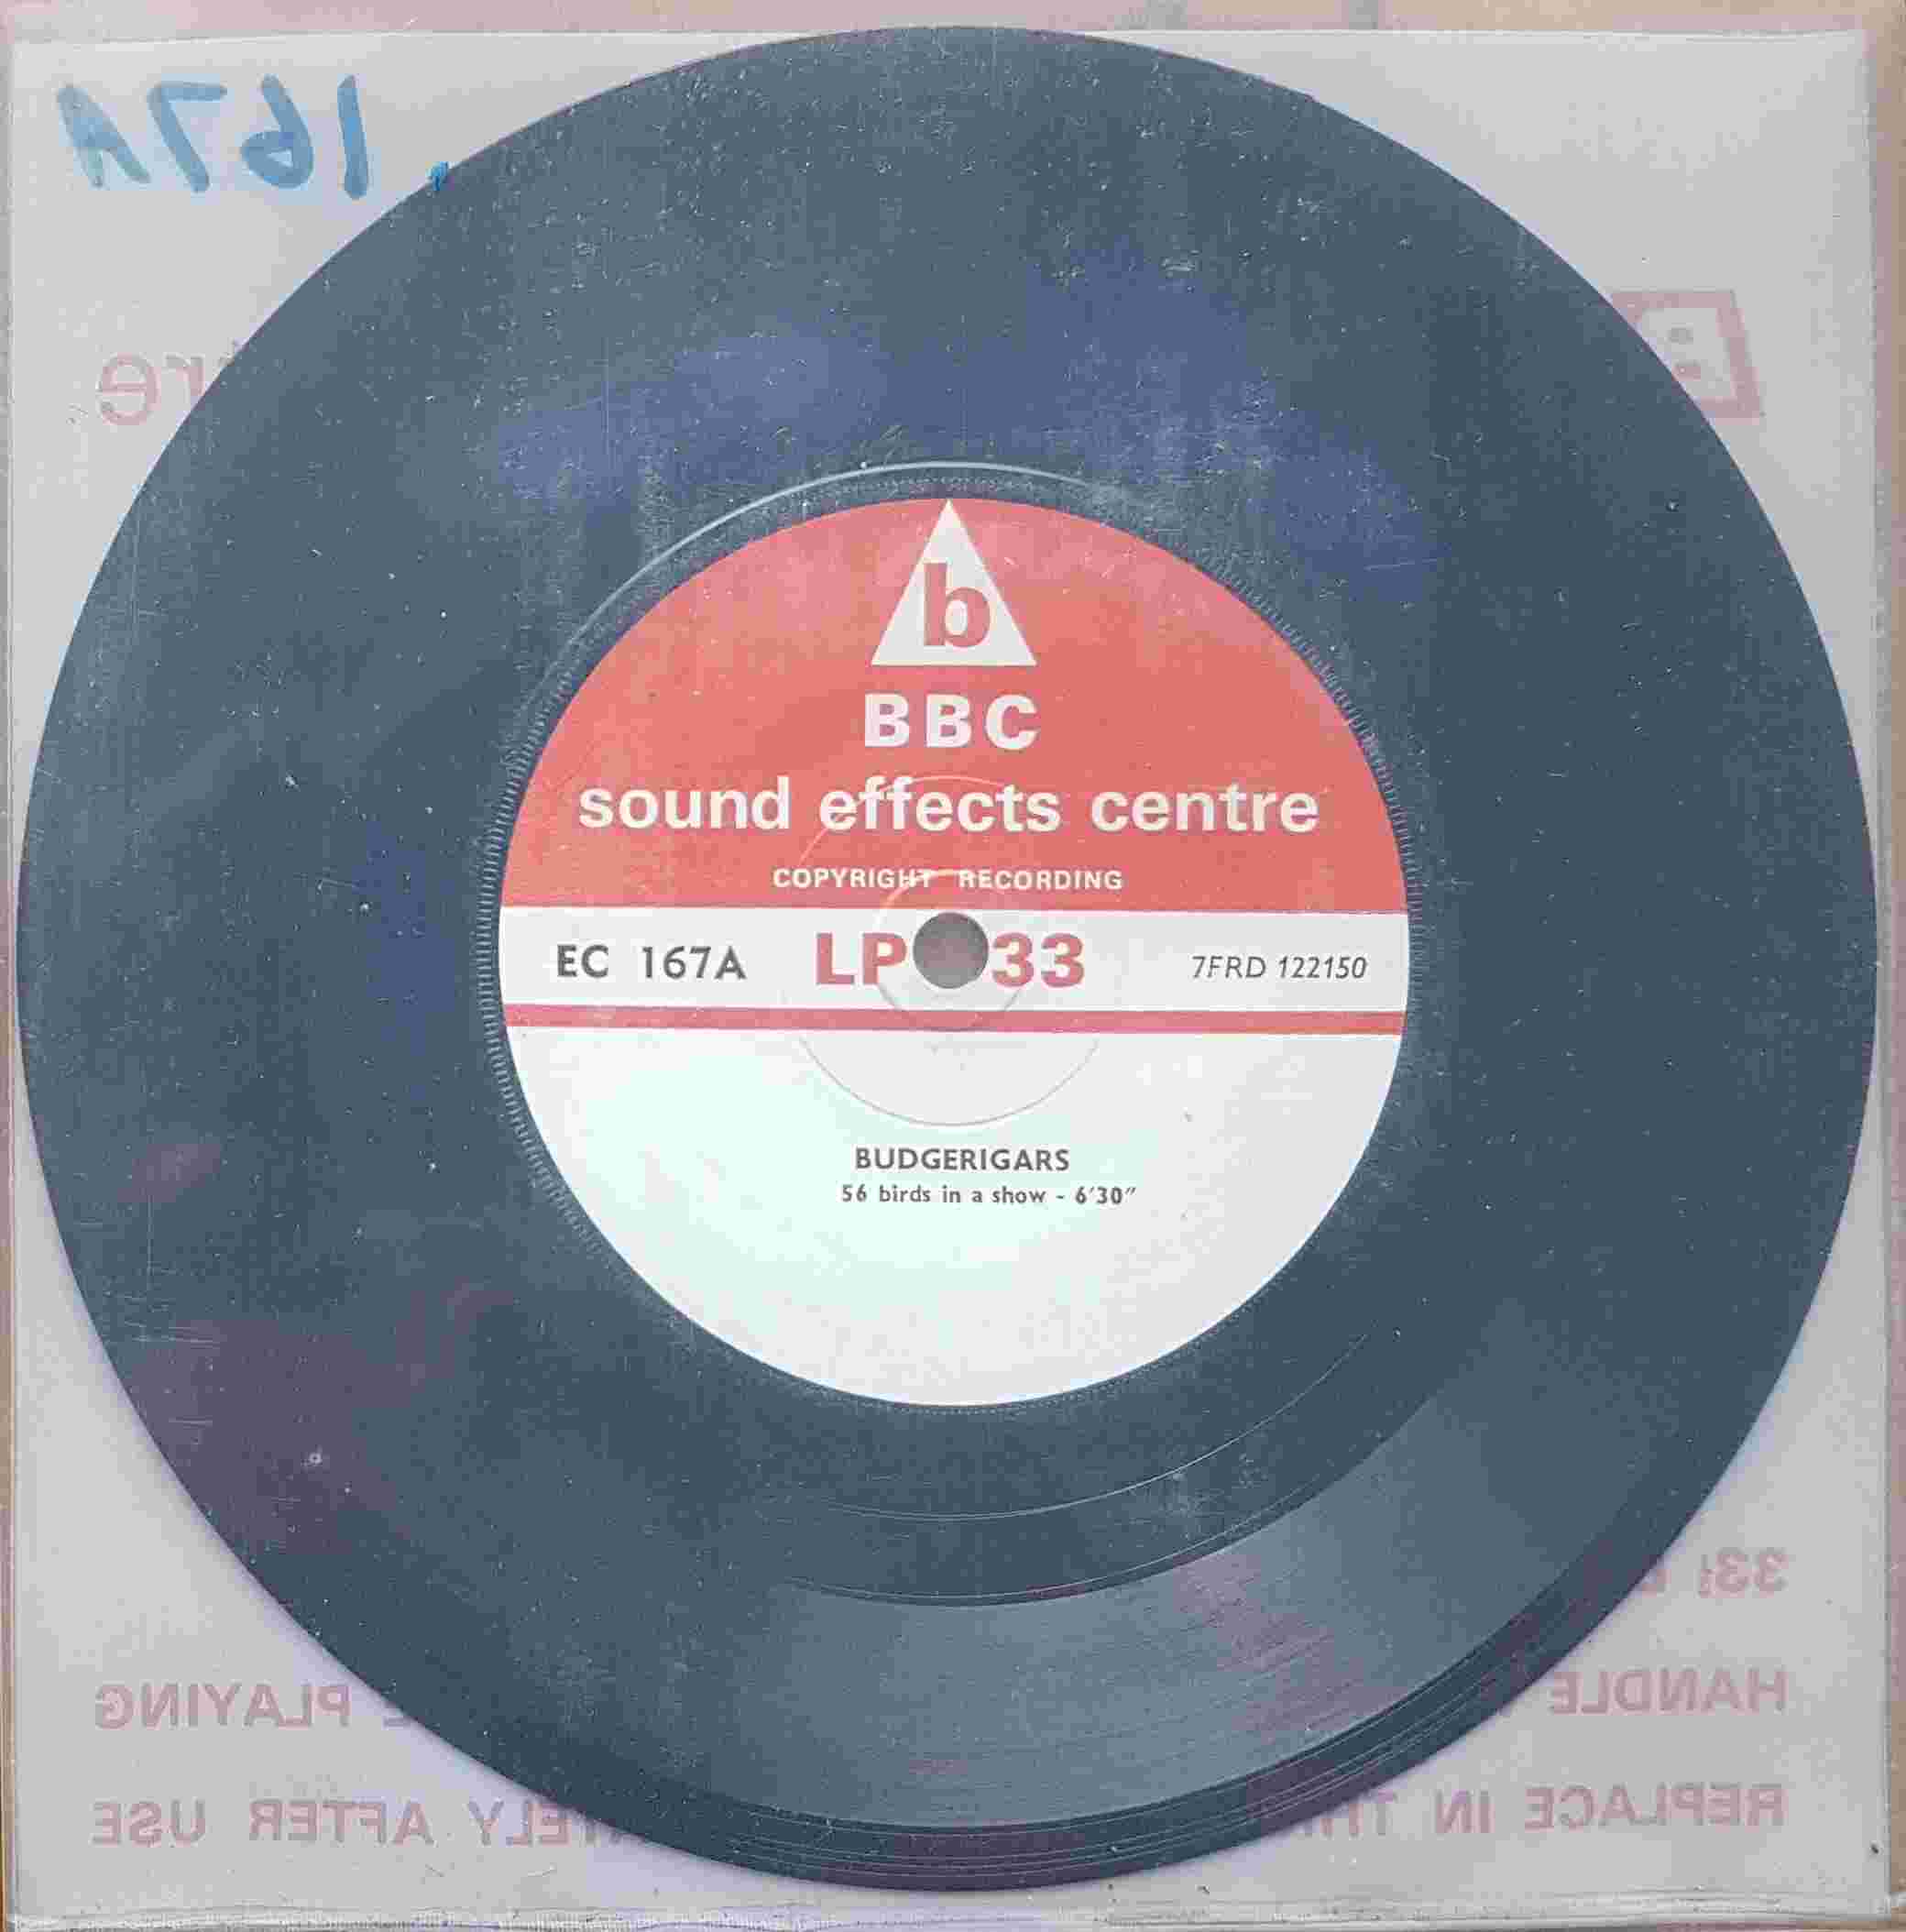 Picture of EC 167A Budgerigars by artist Not registered from the BBC records and Tapes library